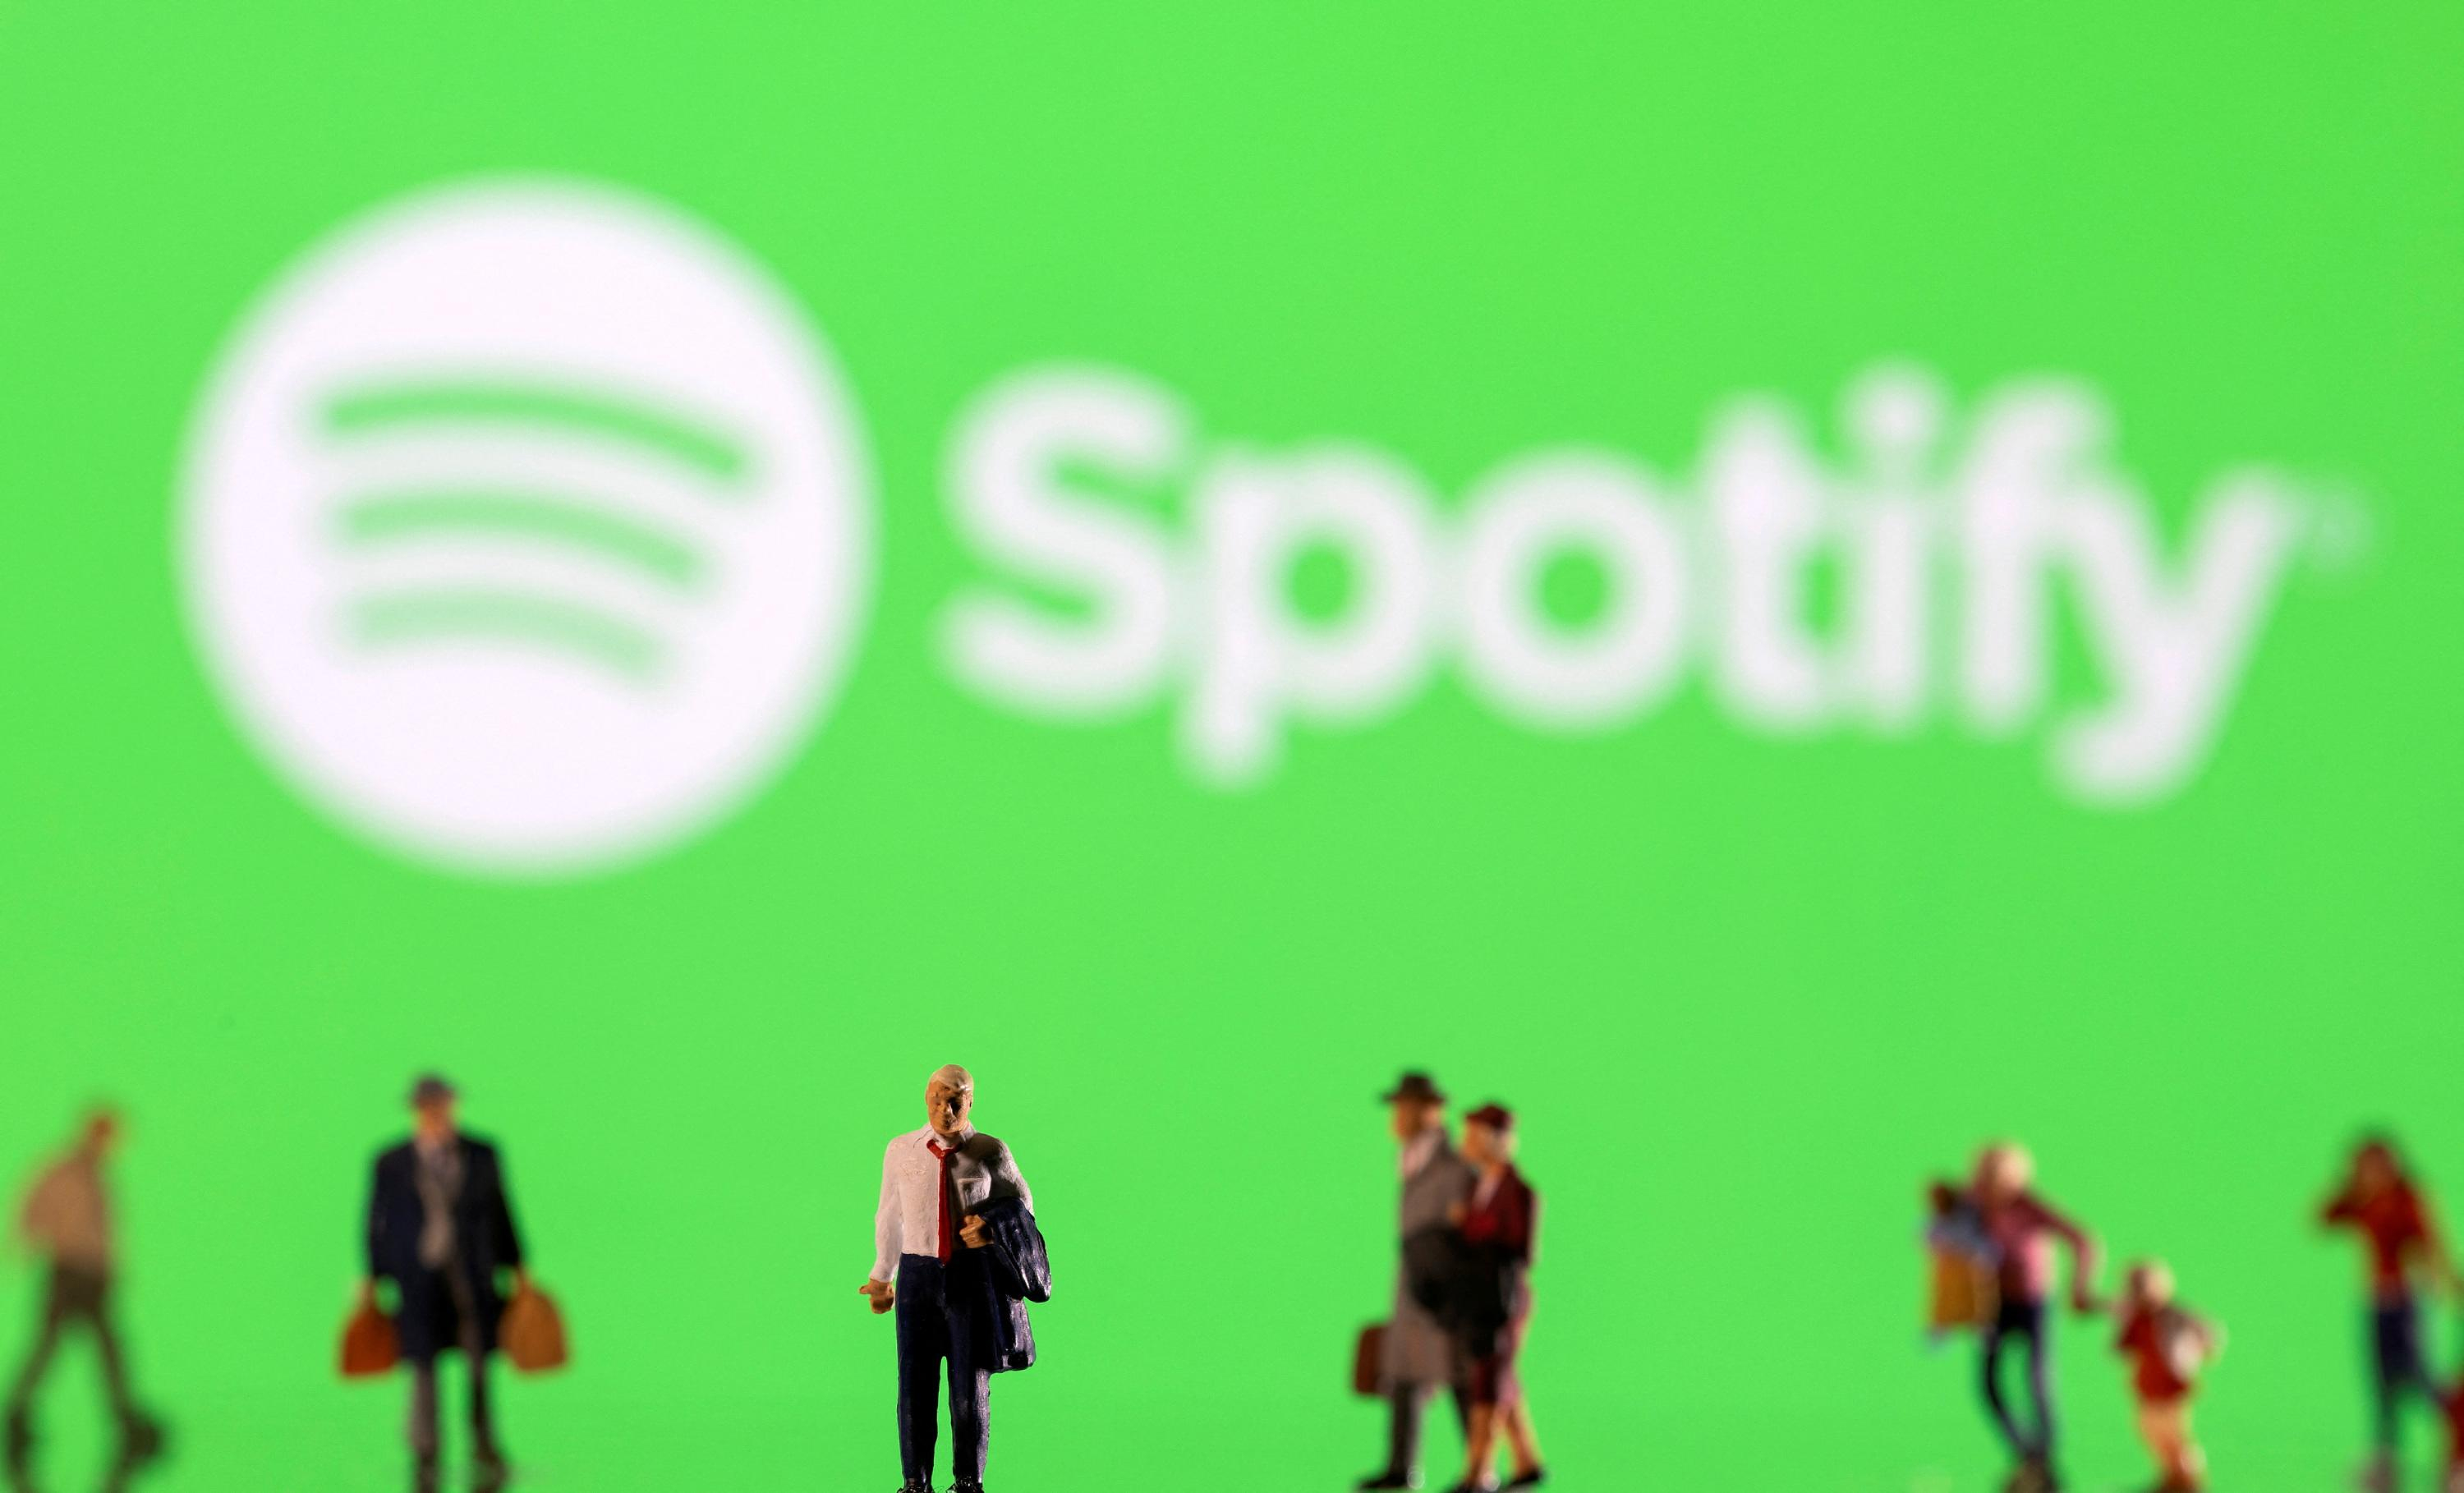 Spotify goes green in the first quarter and sees its number of paying subscribers increase